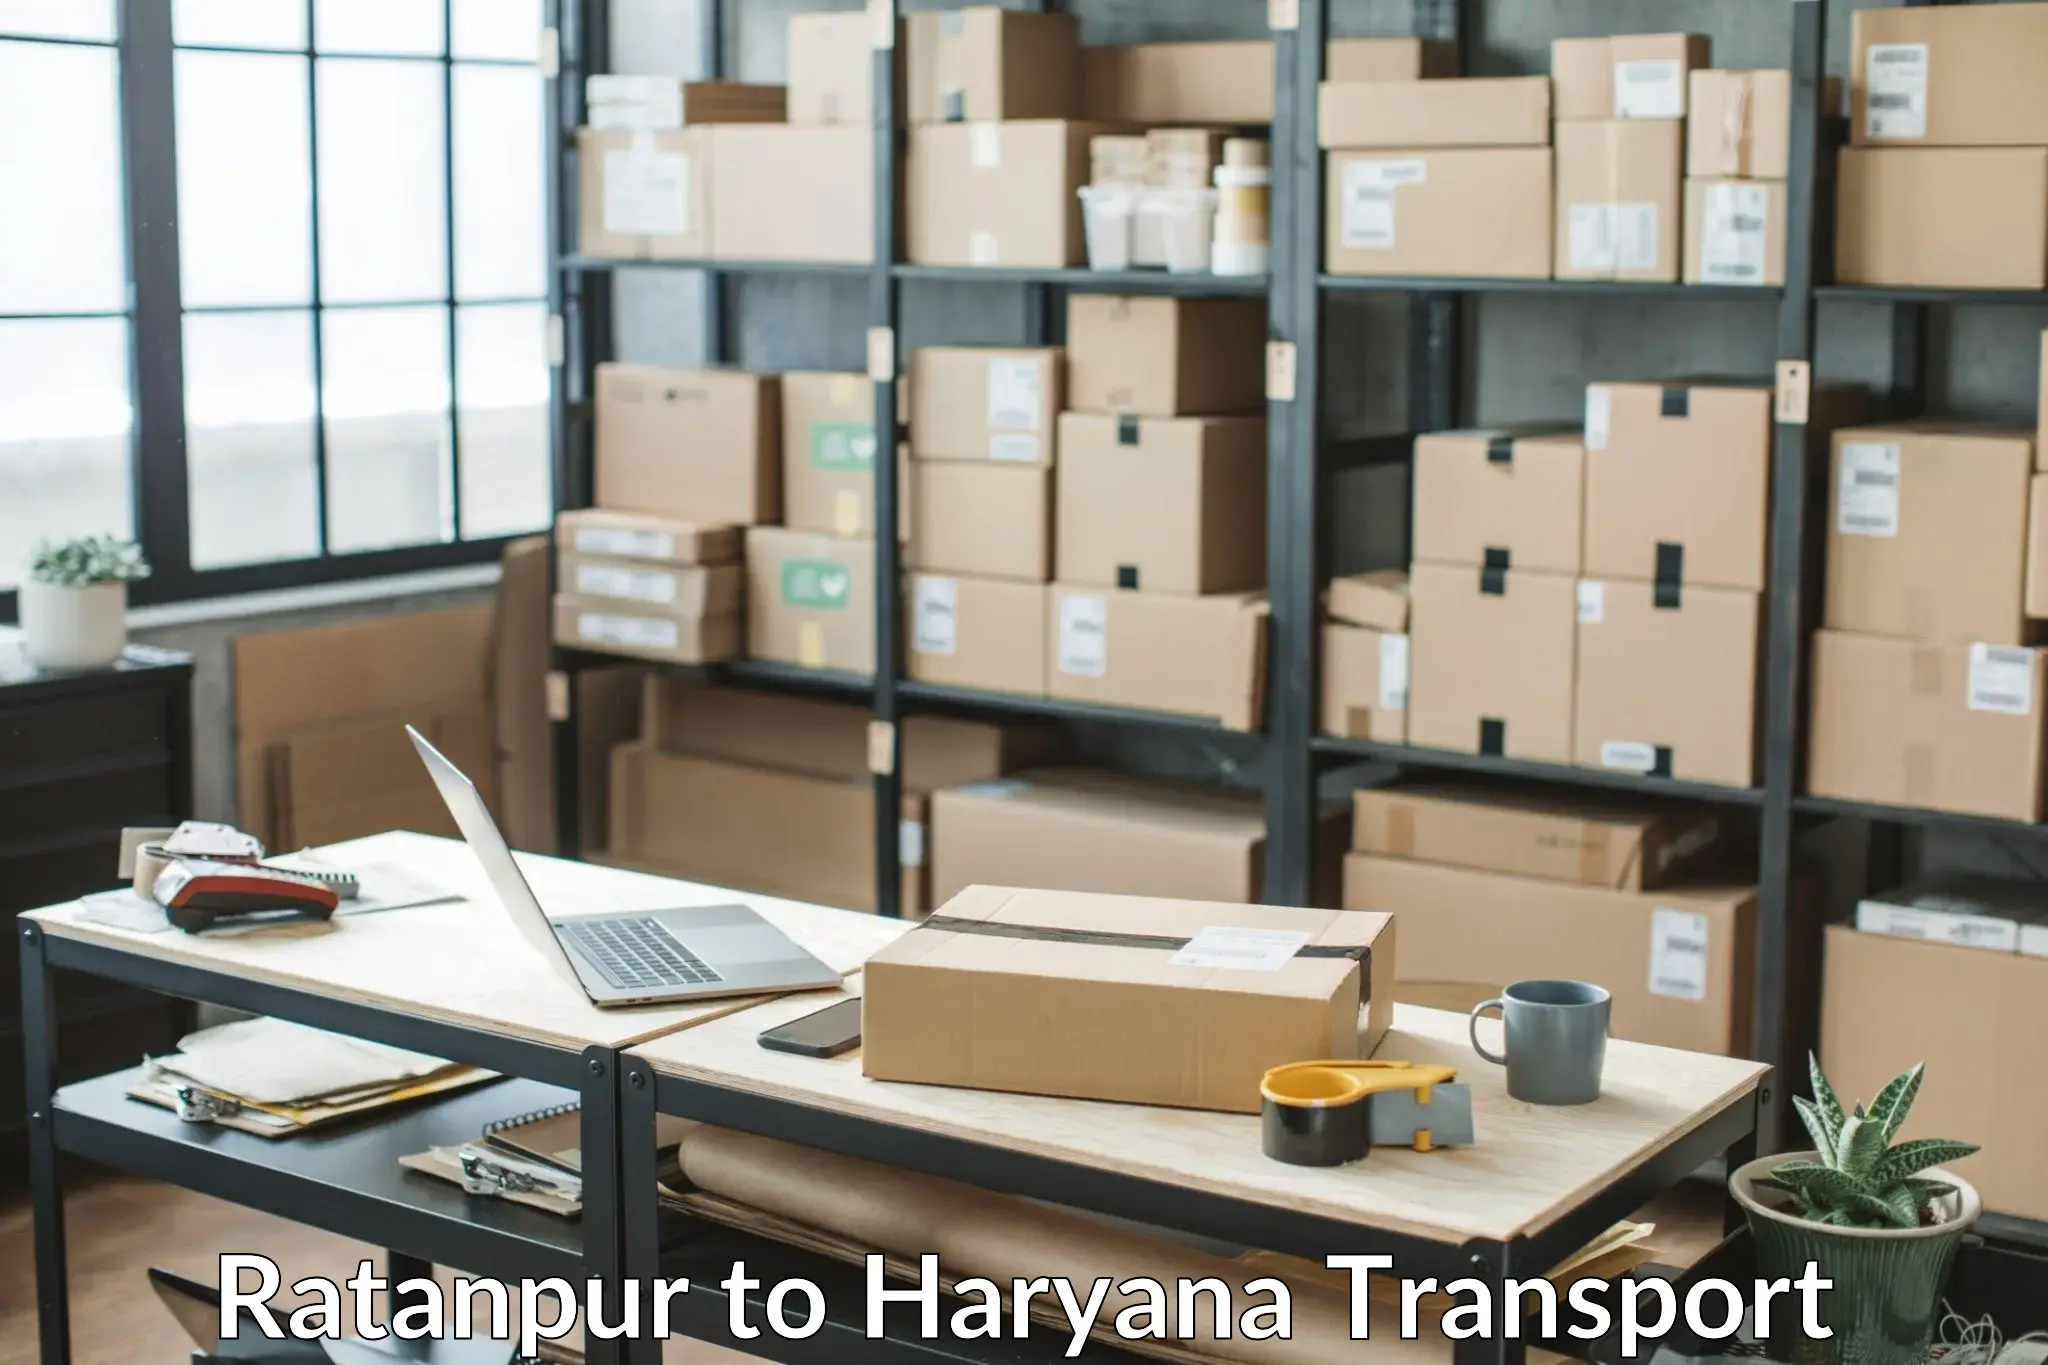 Domestic goods transportation services in Ratanpur to Bilaspur Haryana